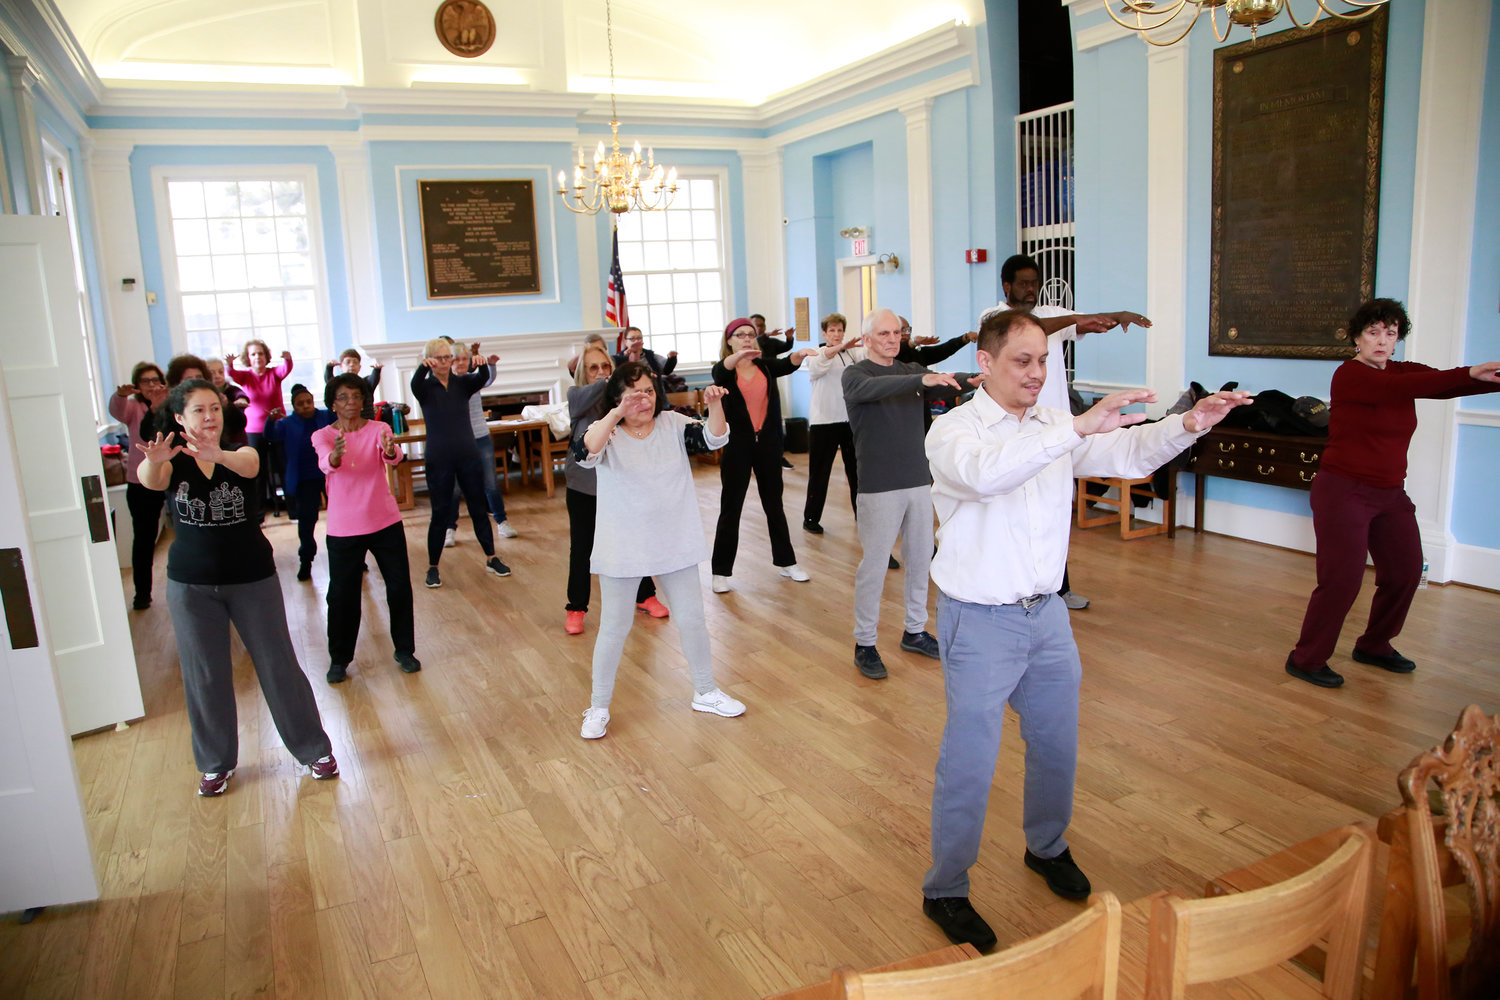 The library’s Tai chi class was full and held in the “original reading room.”